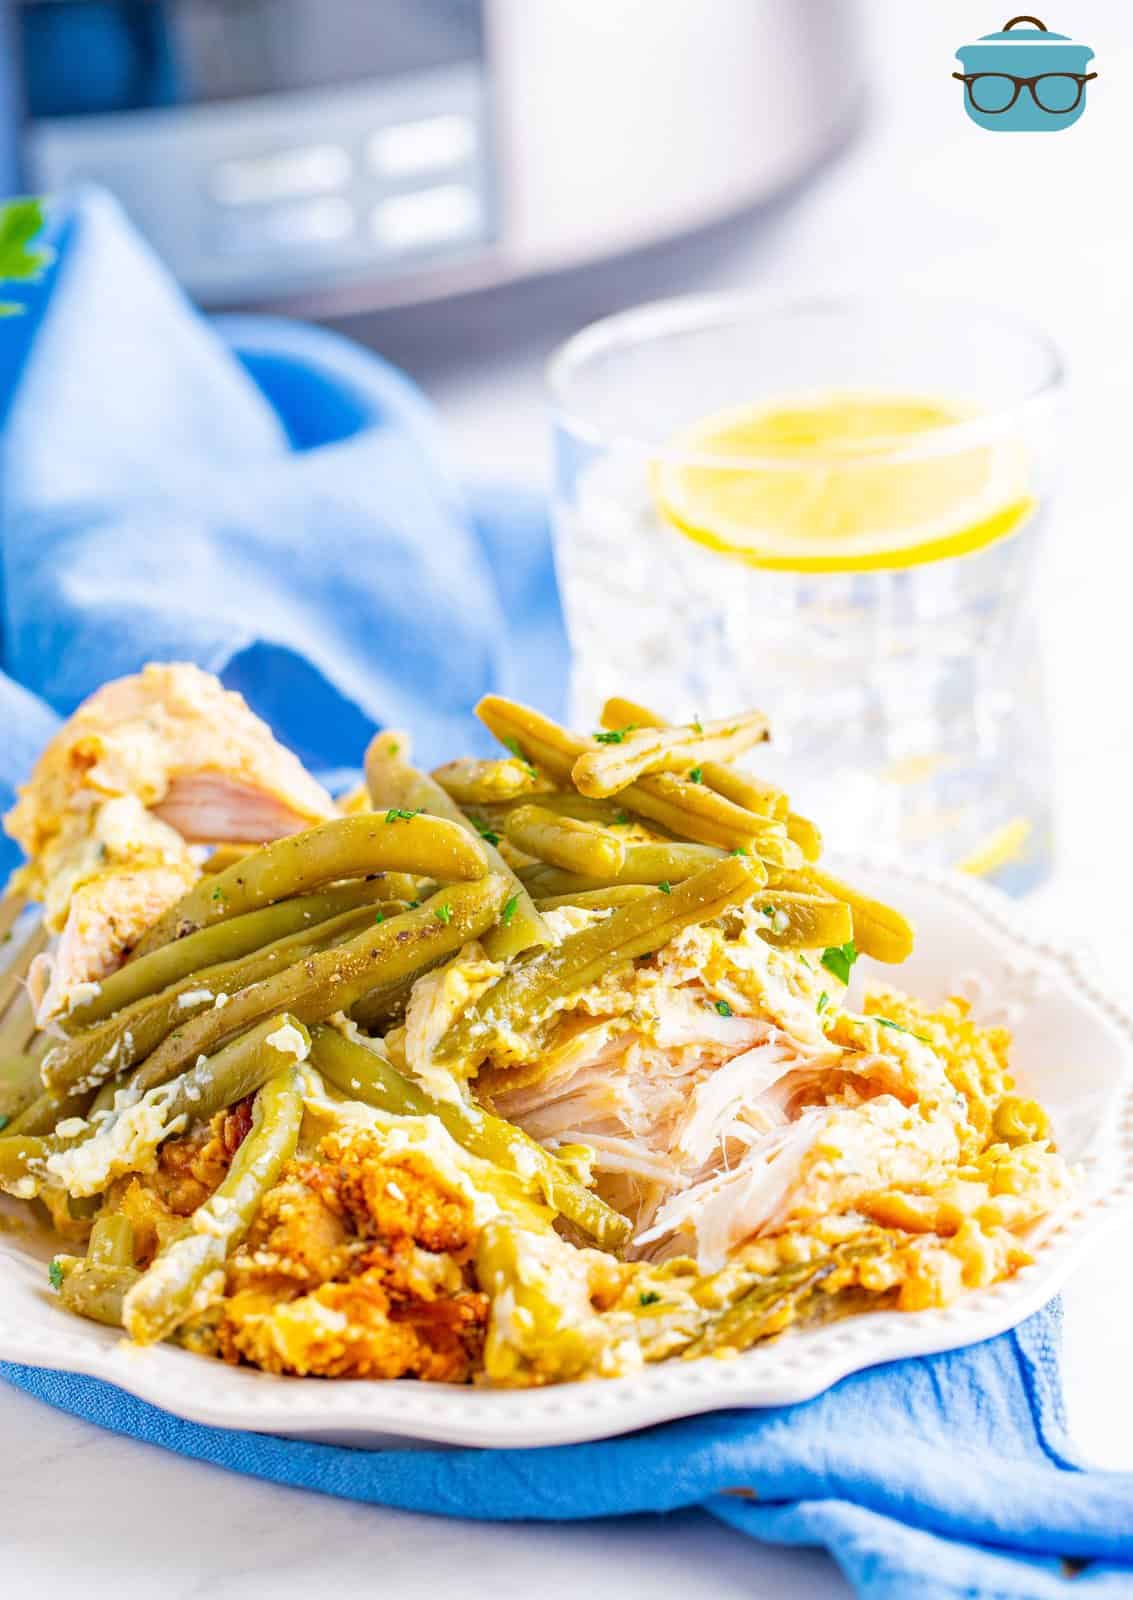 chicken, stuffing and green beans shown served on a round white plate with a glass of ice water in the background.